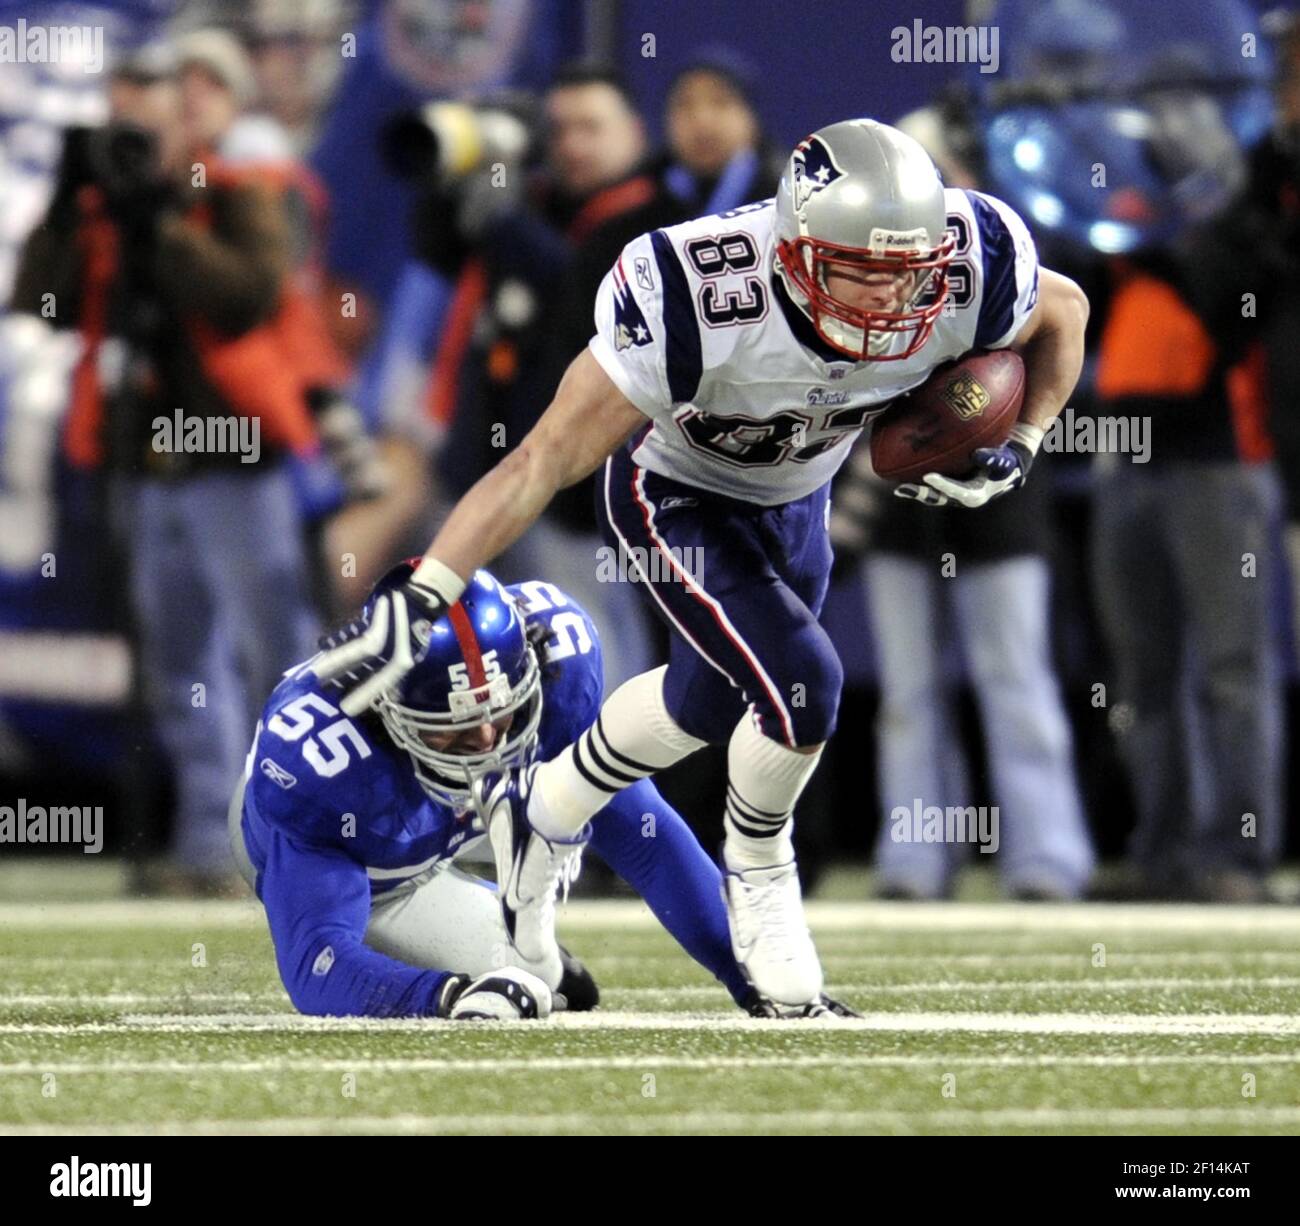 New England Patriots' Wes Welker runs for yardage past New York Giants' Kawika Mitchell in the first quarter at Giants Stadium in East Rutherford, New Jersey, on Saturday, December 29, 2007. (Photo by David L. Pokress/Newsday/MCT/Sipa USA) Stock Photo